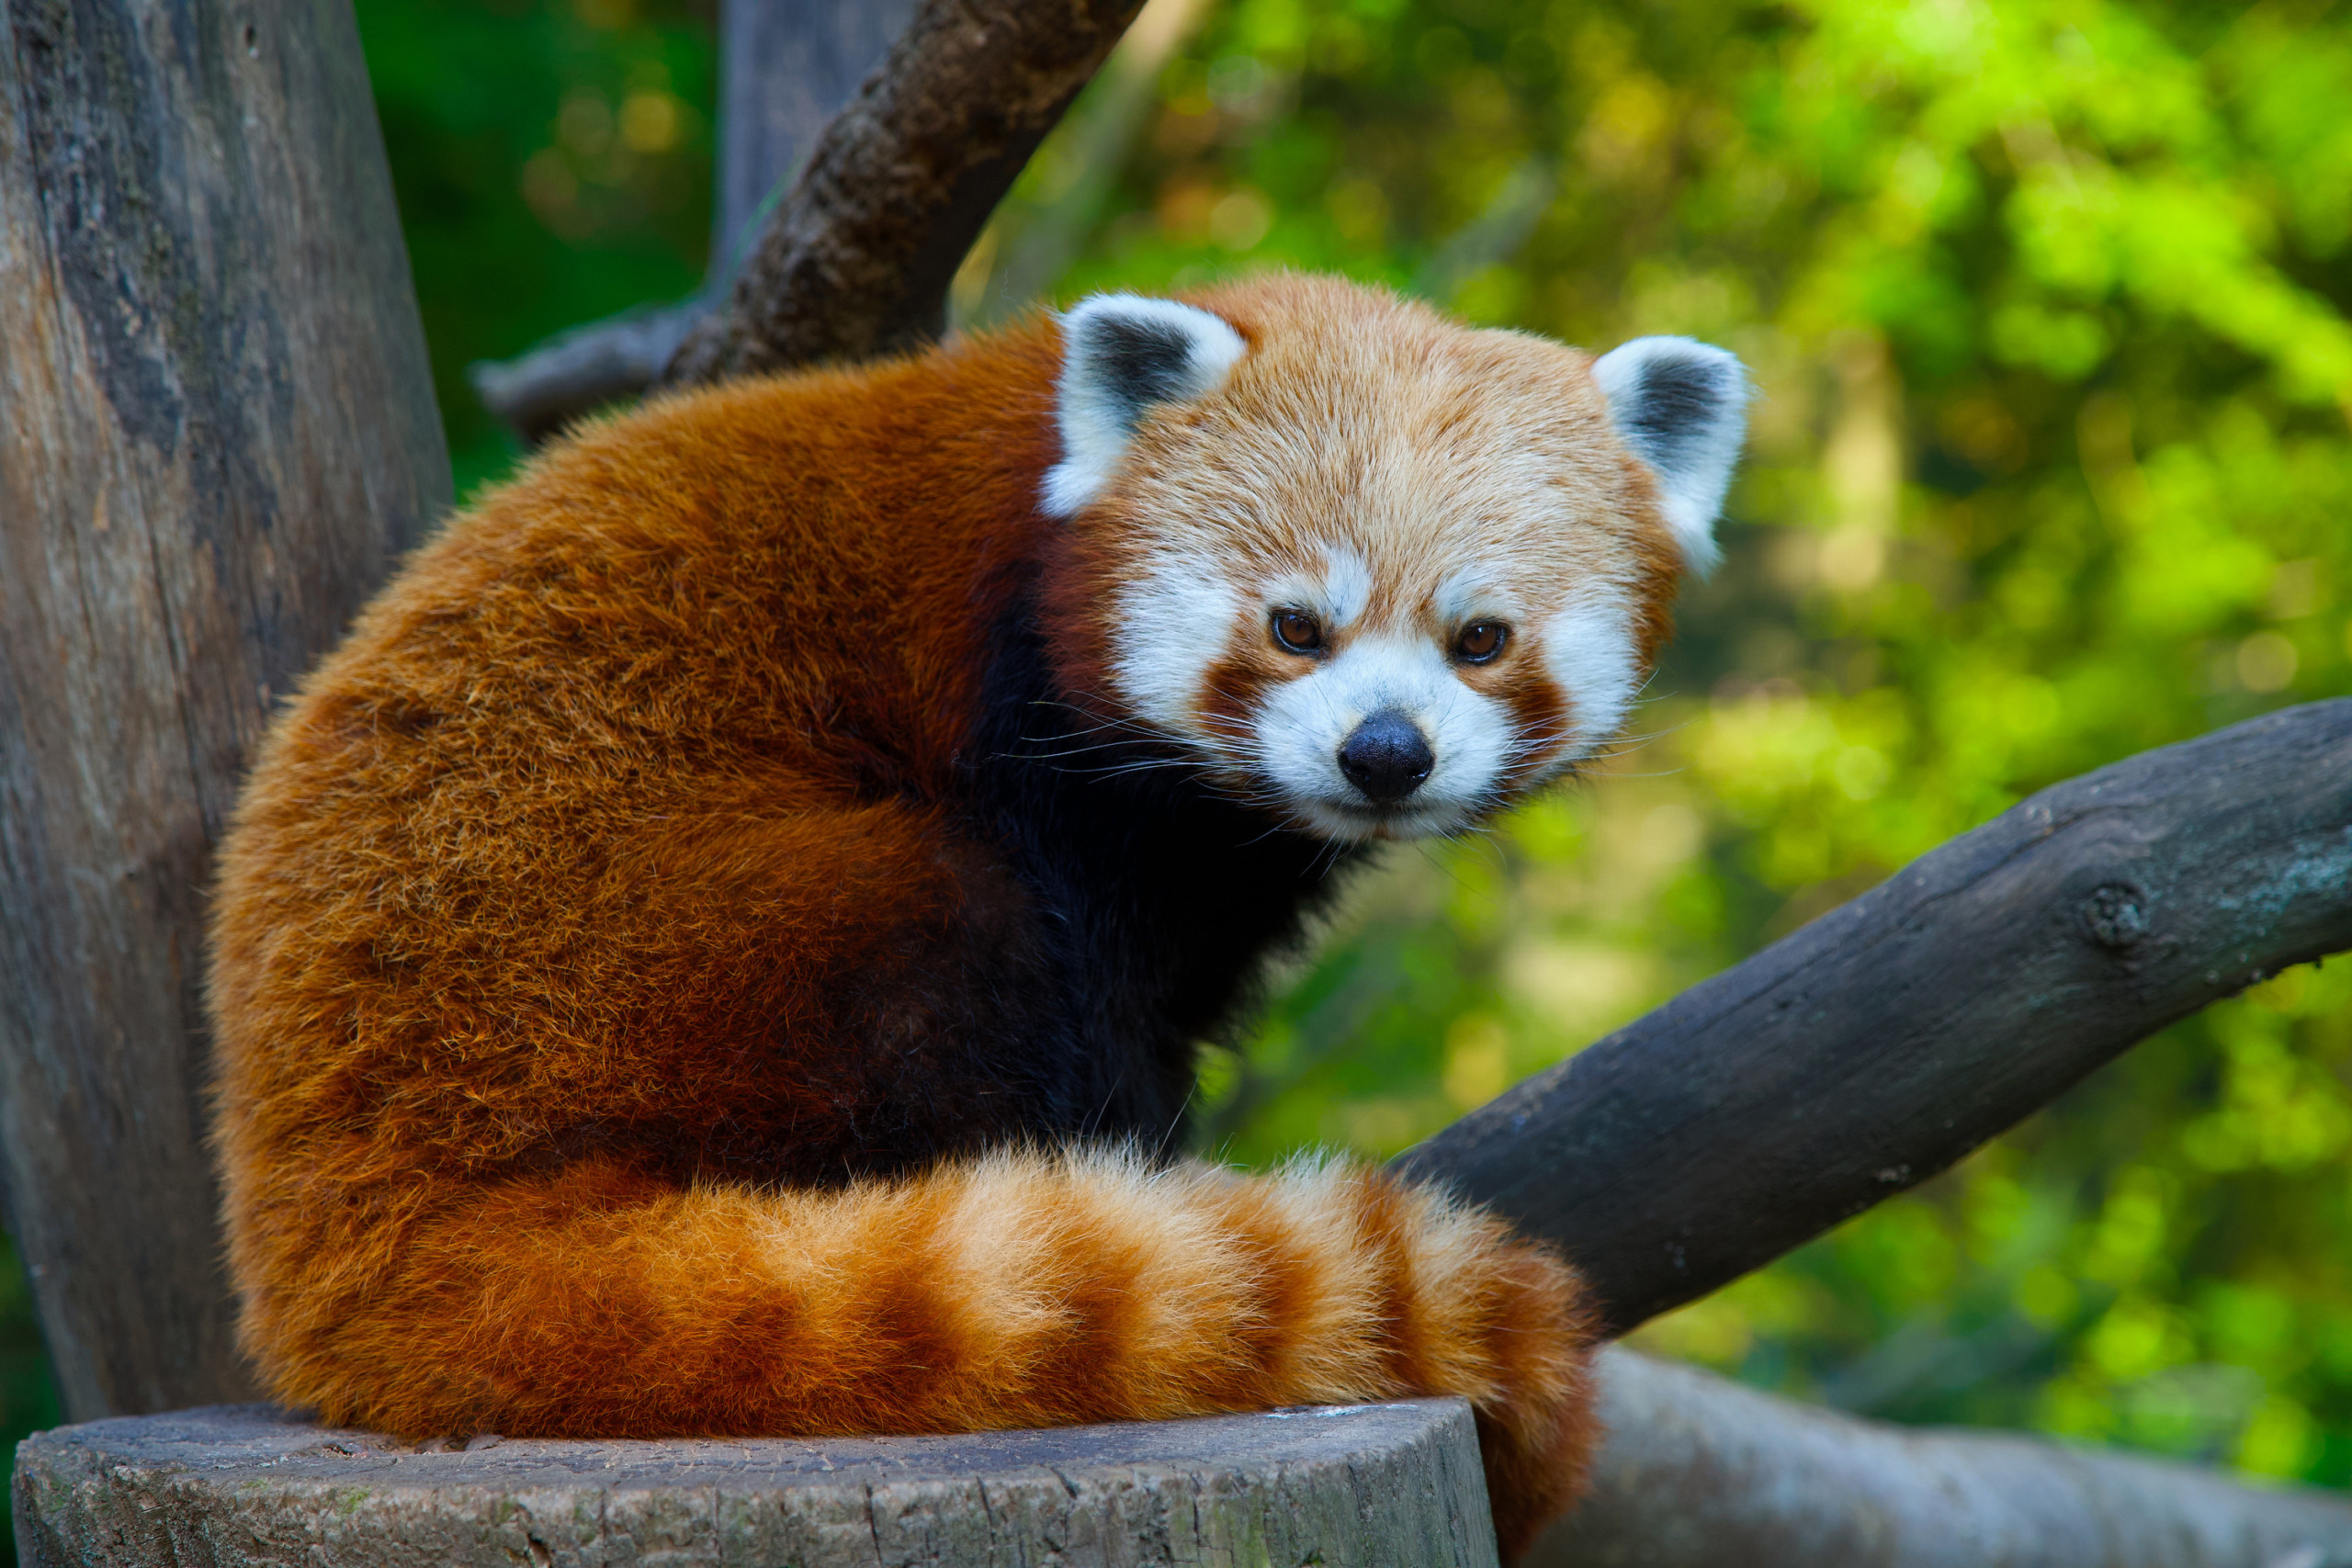 https://www.zoo-magdeburg.de/wp-content/uploads/2022/09/22-09-15-roter-panda-zoo-magdeburg-thomas-rolle-scaled.jpg